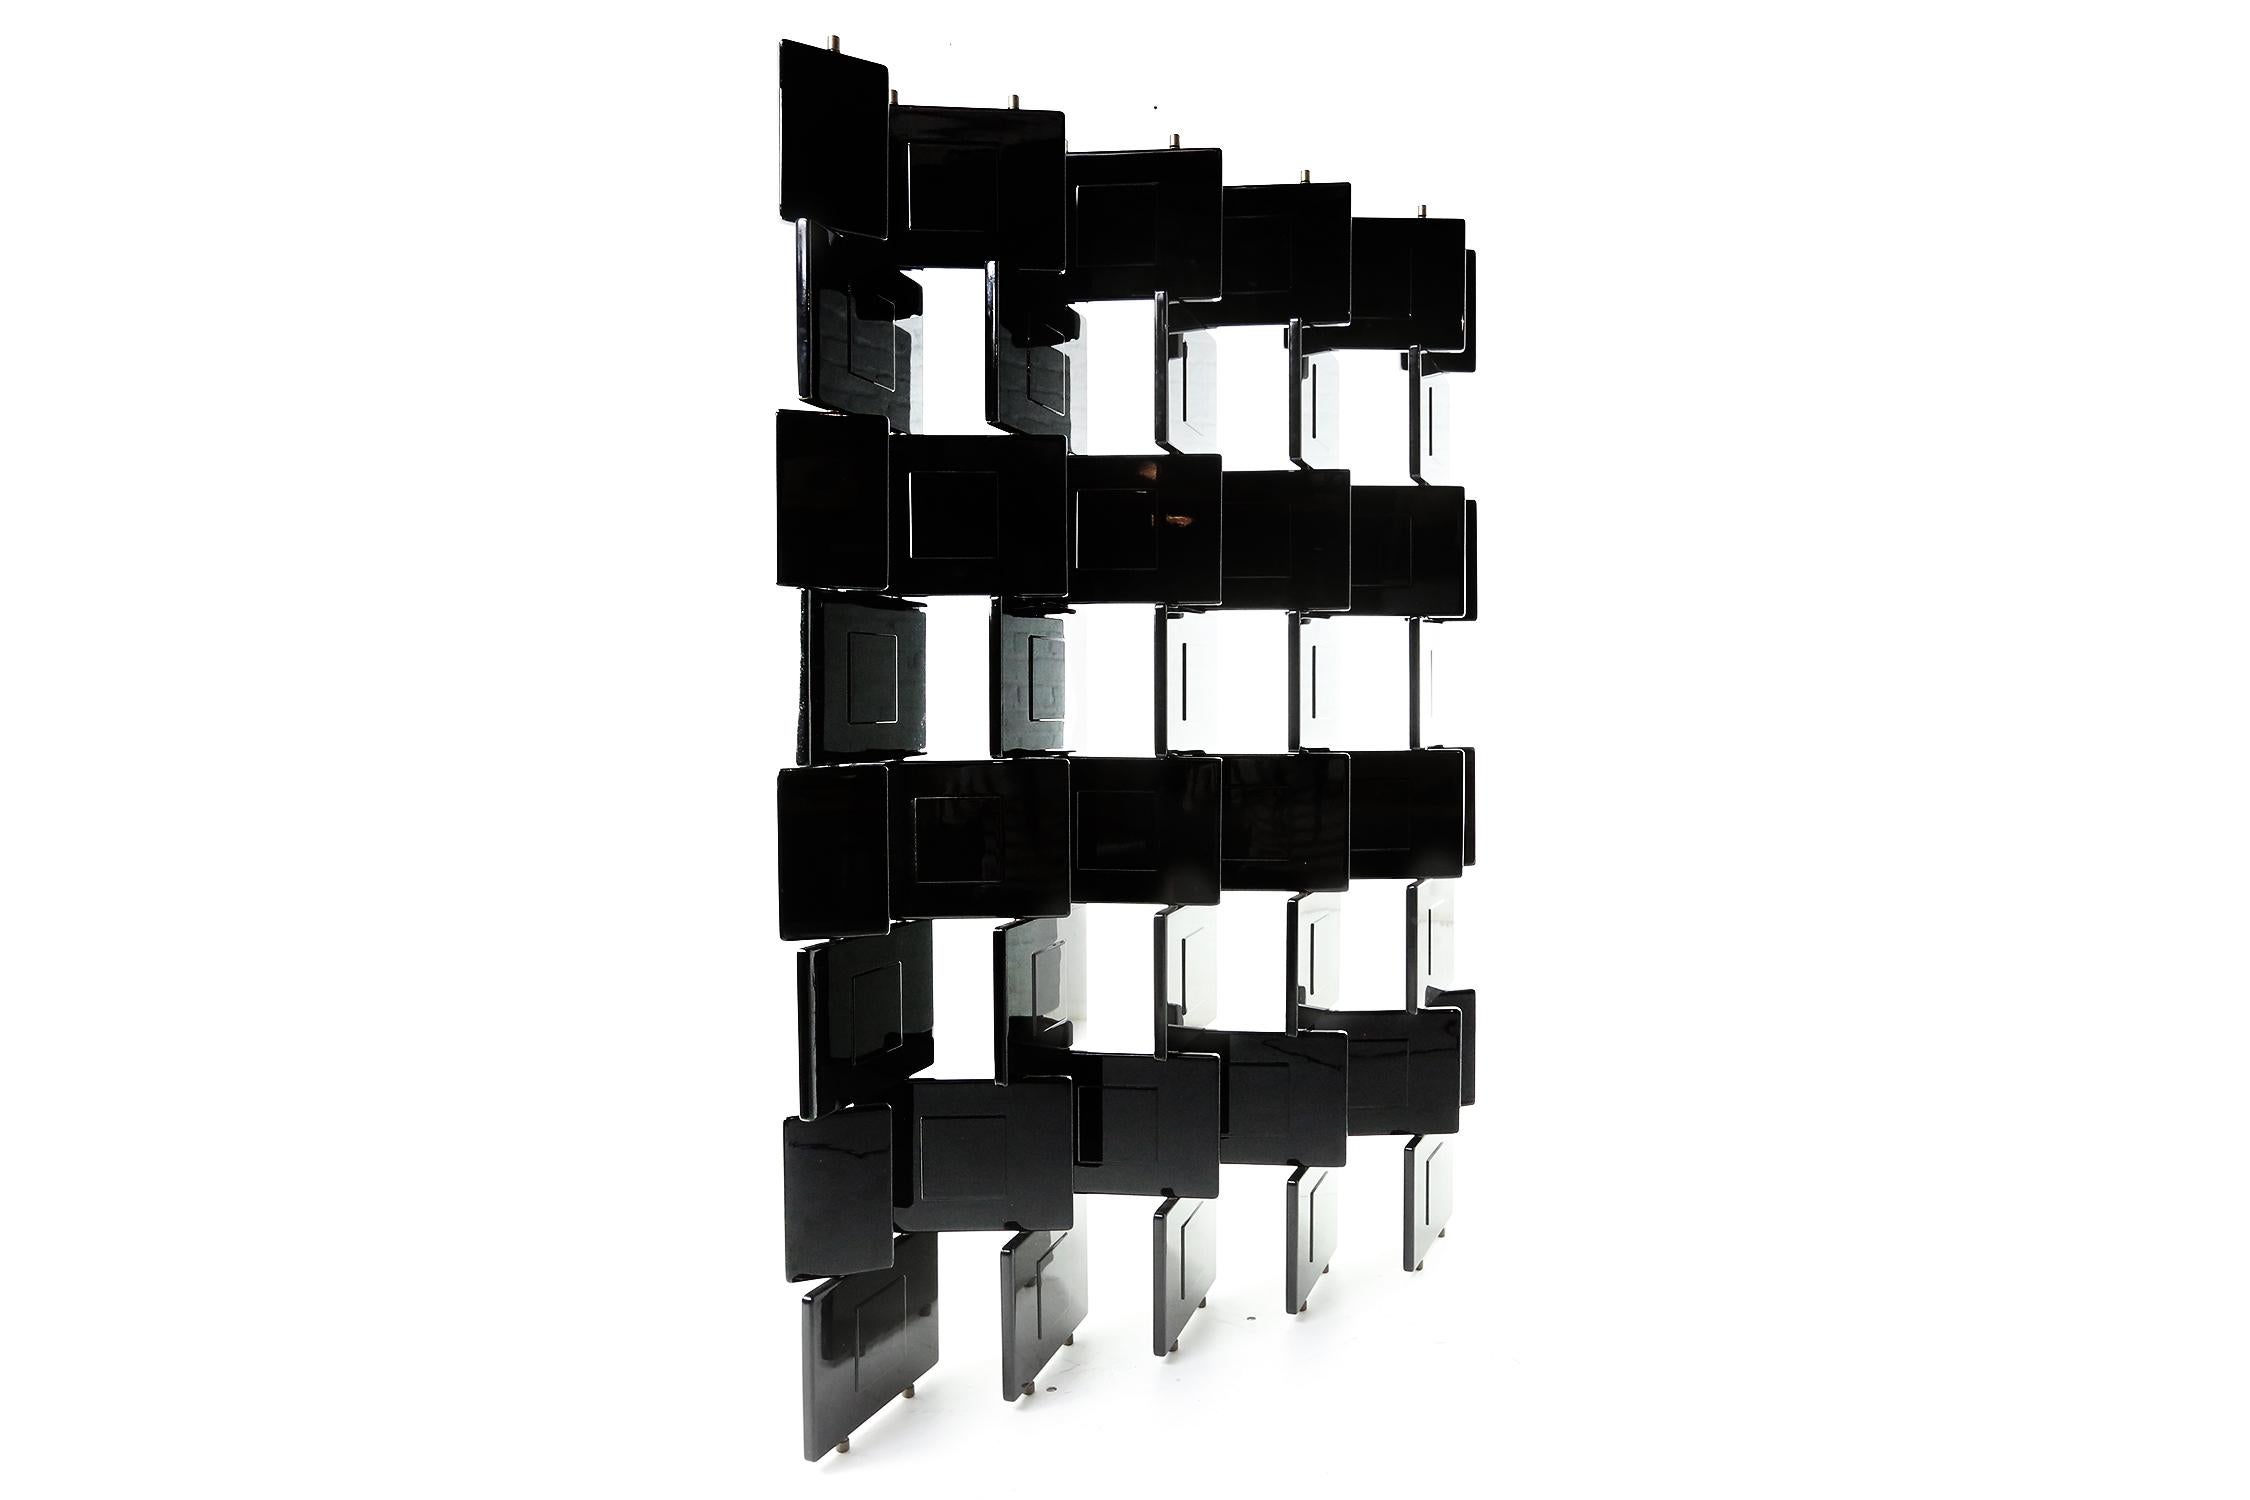 Eileen gray block screen room divider, made by 'Architects Italy' in the 1990s,
Its made in black lacquered wood moveable panels and brass structure.